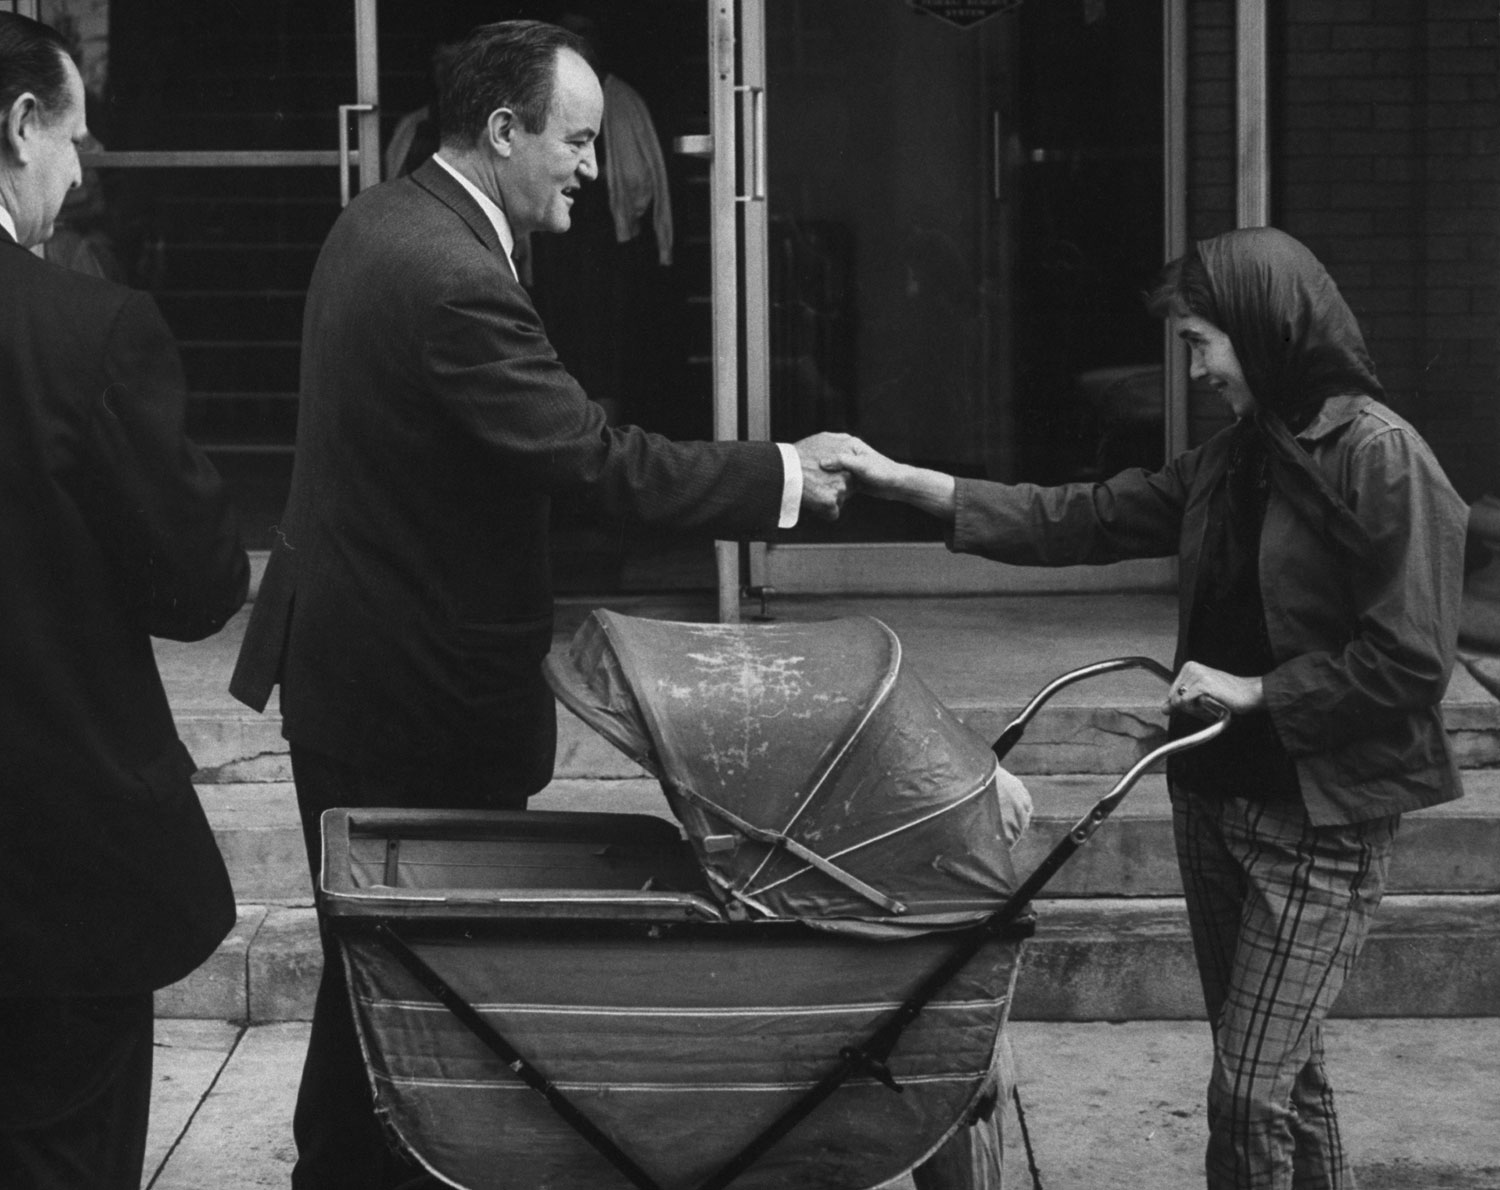 Hubert Humphrey shakes hands with a voter while campaigning prior to the West Virginia primary in April 1960.